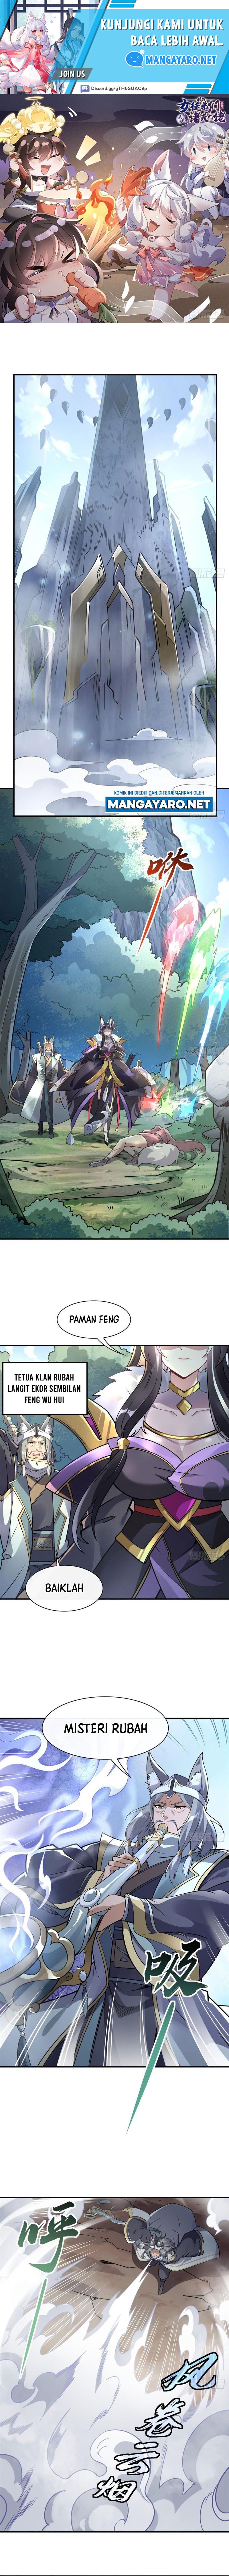 Dilarang COPAS - situs resmi www.mangacanblog.com - Komik my female apprentices are all big shots from the future 177 - chapter 177 178 Indonesia my female apprentices are all big shots from the future 177 - chapter 177 Terbaru 1|Baca Manga Komik Indonesia|Mangacan